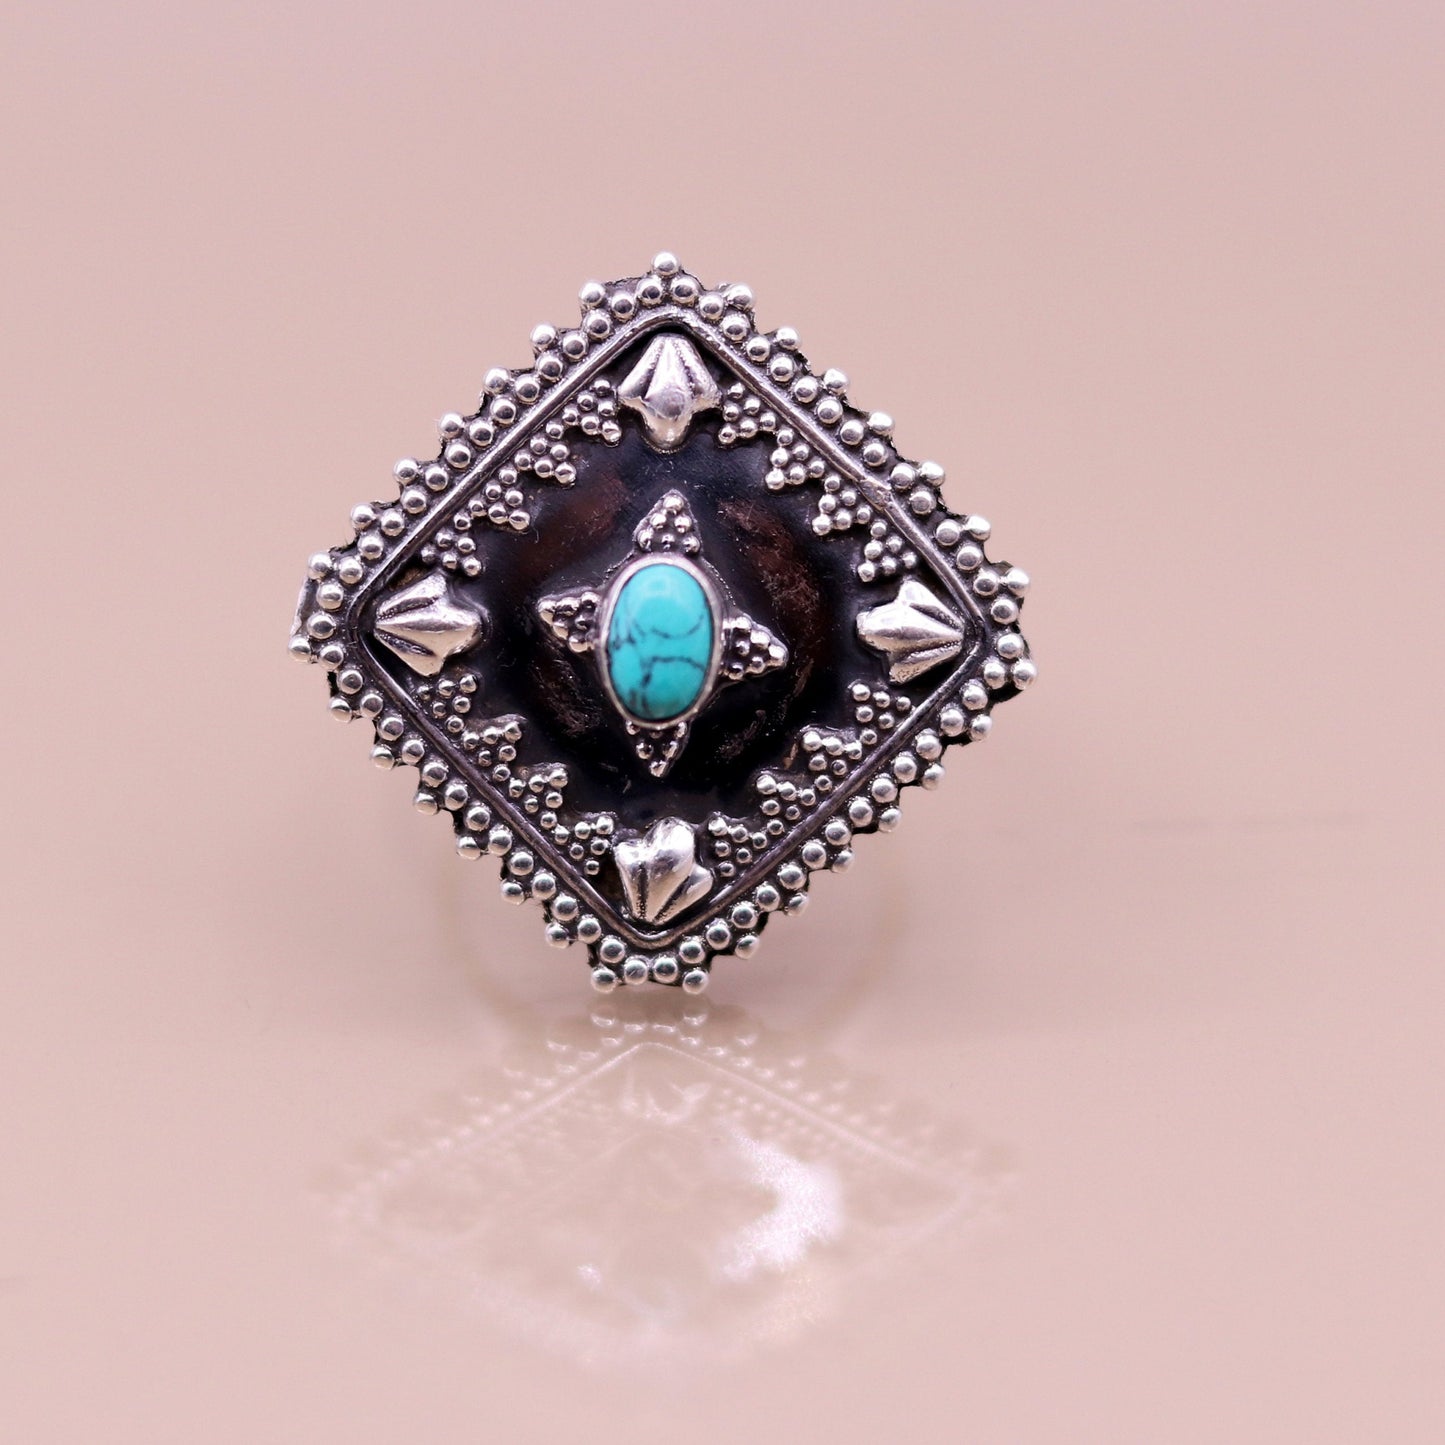 Awesome Vintage antique design handmade 925 sterling silver fabulous turquoise stone adjustable ring band, amazing tribal jewelry sr211 - TRIBAL ORNAMENTS